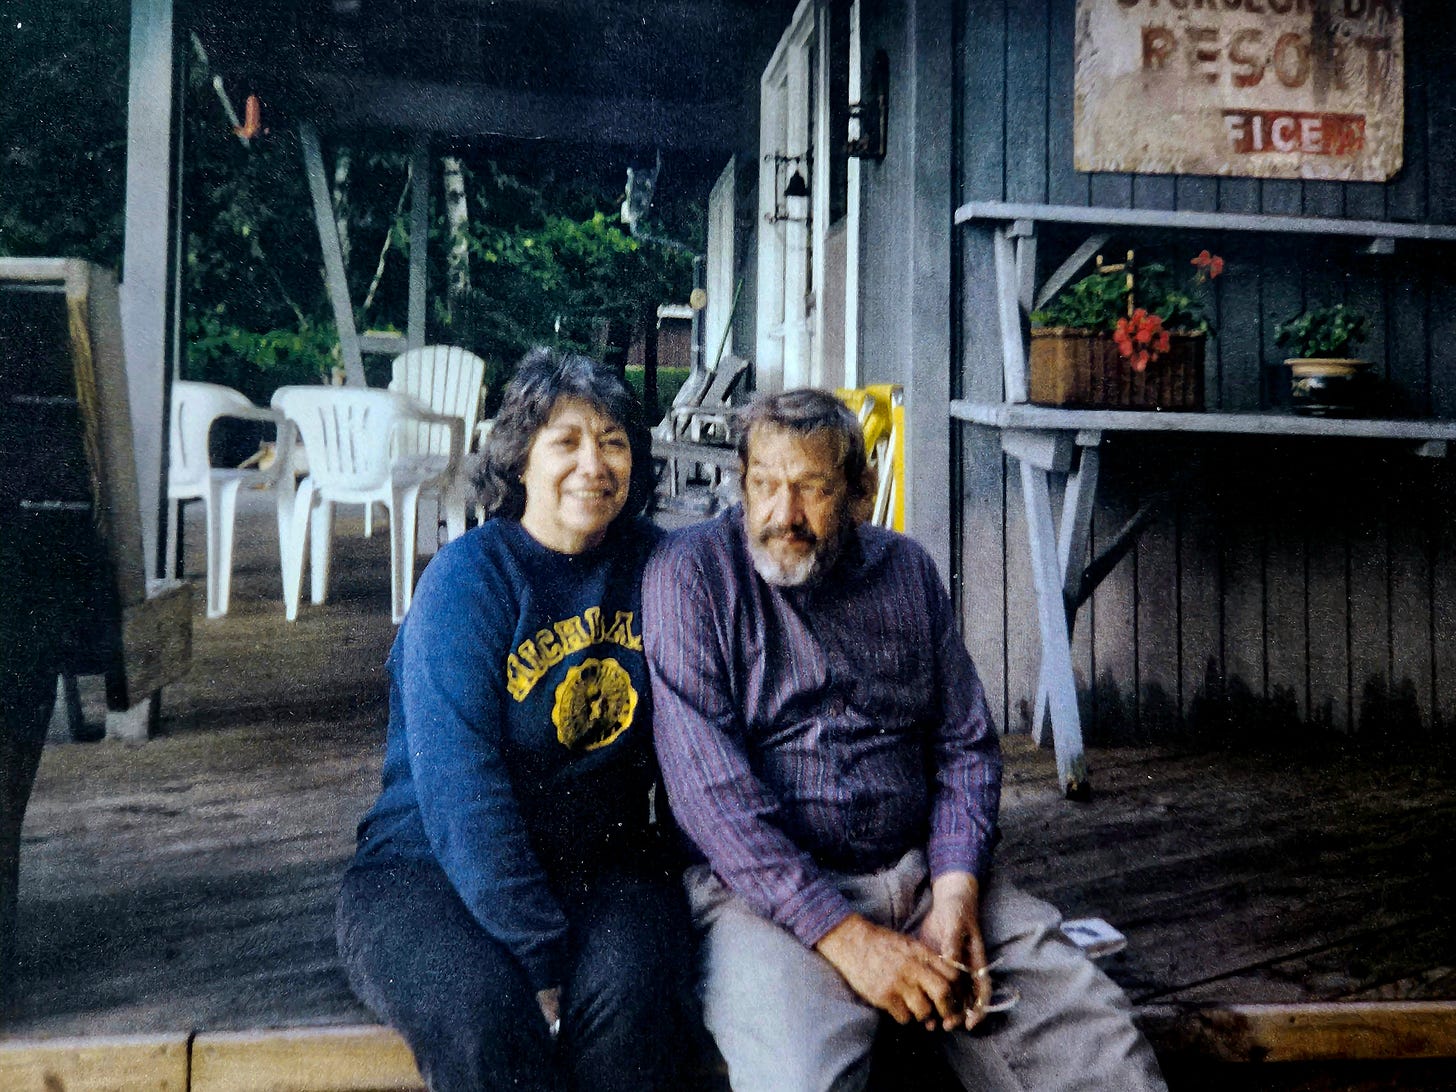 A woman and man sit arm in arm on the steps of a porch